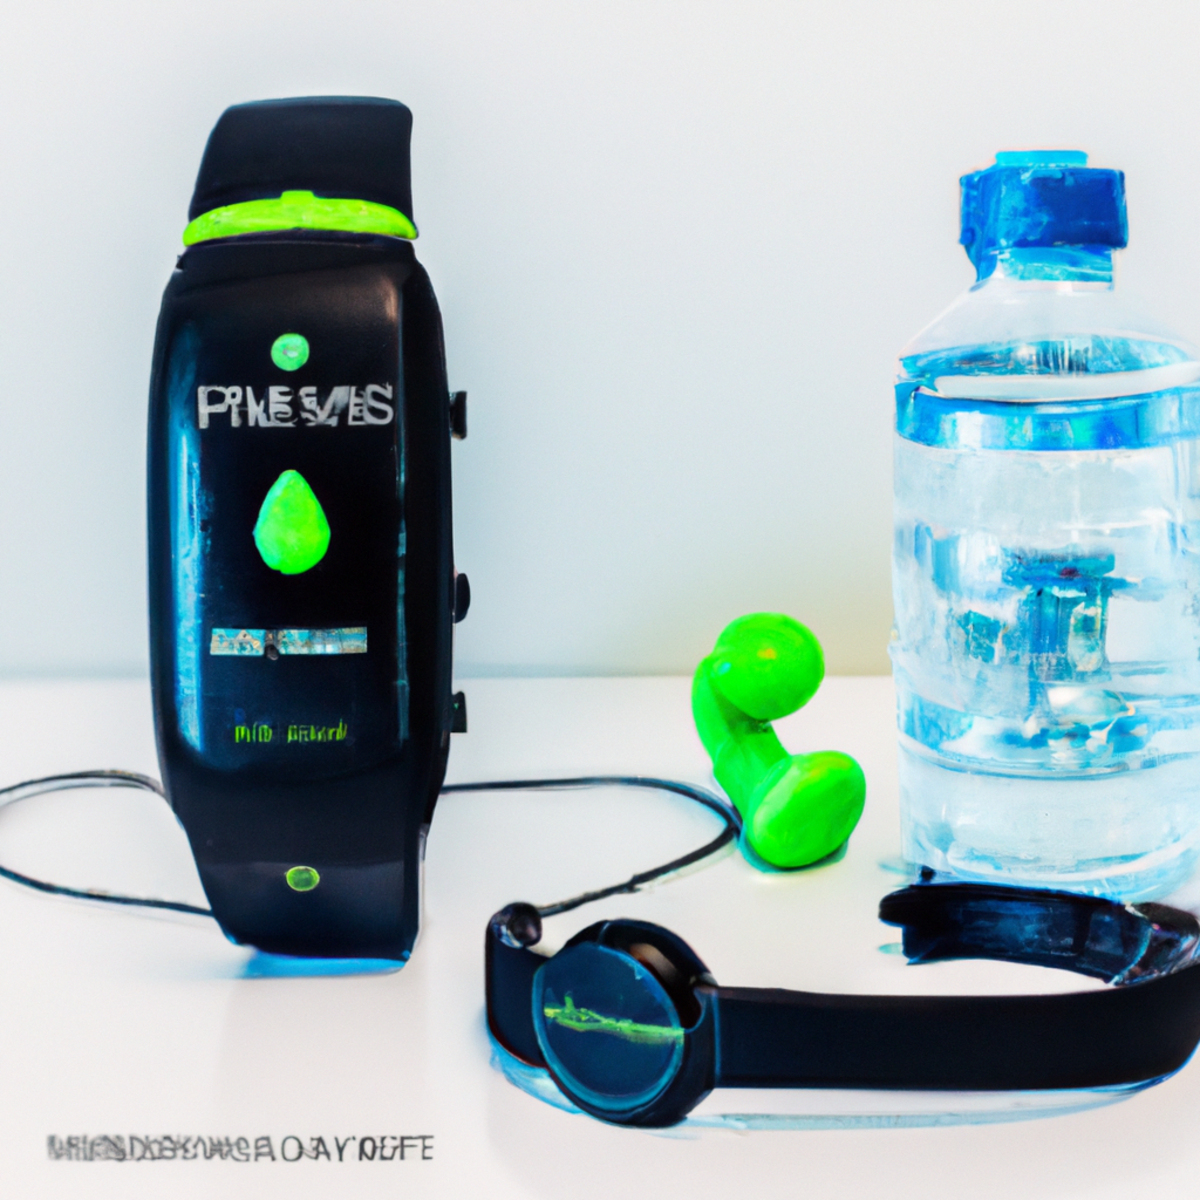 The photo features a sleek black fitness tracker watch, a pair of wireless earbuds, and a water bottle with a bright green cap, emphasizing the use of fitness apps and wearables. The watch, specifically designed for tracking fitness activities, is strapped securely to a toned wrist, displaying the user's heart rate and calories burned during their workout. The earbuds, seamlessly integrated into the user's exercise routine, provide a soundtrack to enhance their fitness experience. The water bottle, a crucial accessory, ensures that the user stays hydrated during their workout session. The background, intentionally blurred, suggests that the user is in motion, possibly using fitness apps and wearables while jogging or cycling. Overall, the photo perfectly captures the essence of the article's topic, showcasing the importance and effectiveness of fitness apps and wearables in enhancing a fitness routine.